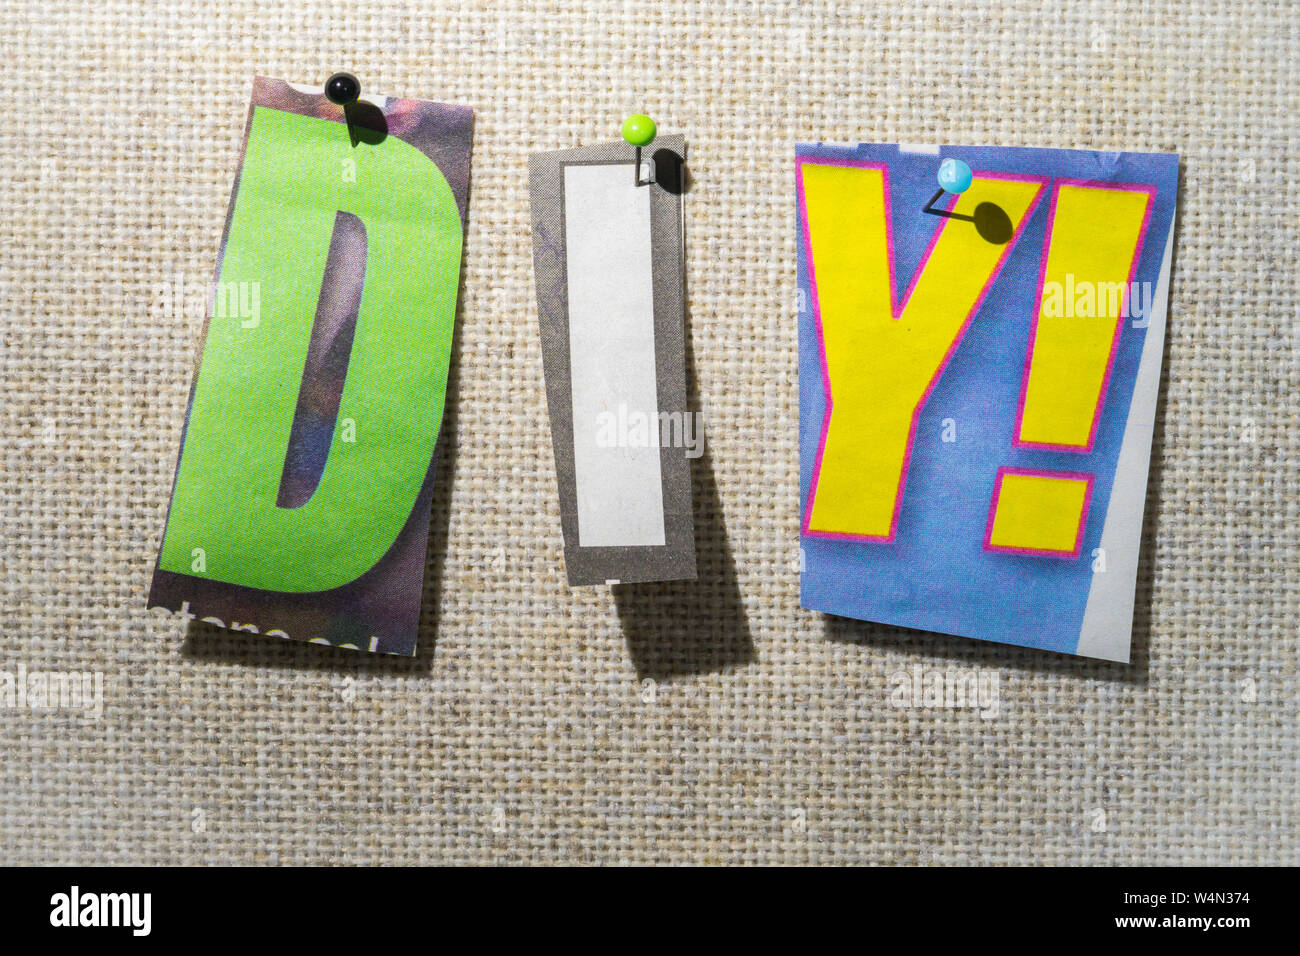 The DIY! Do it Yourself on a bulletin board using cut-out paper